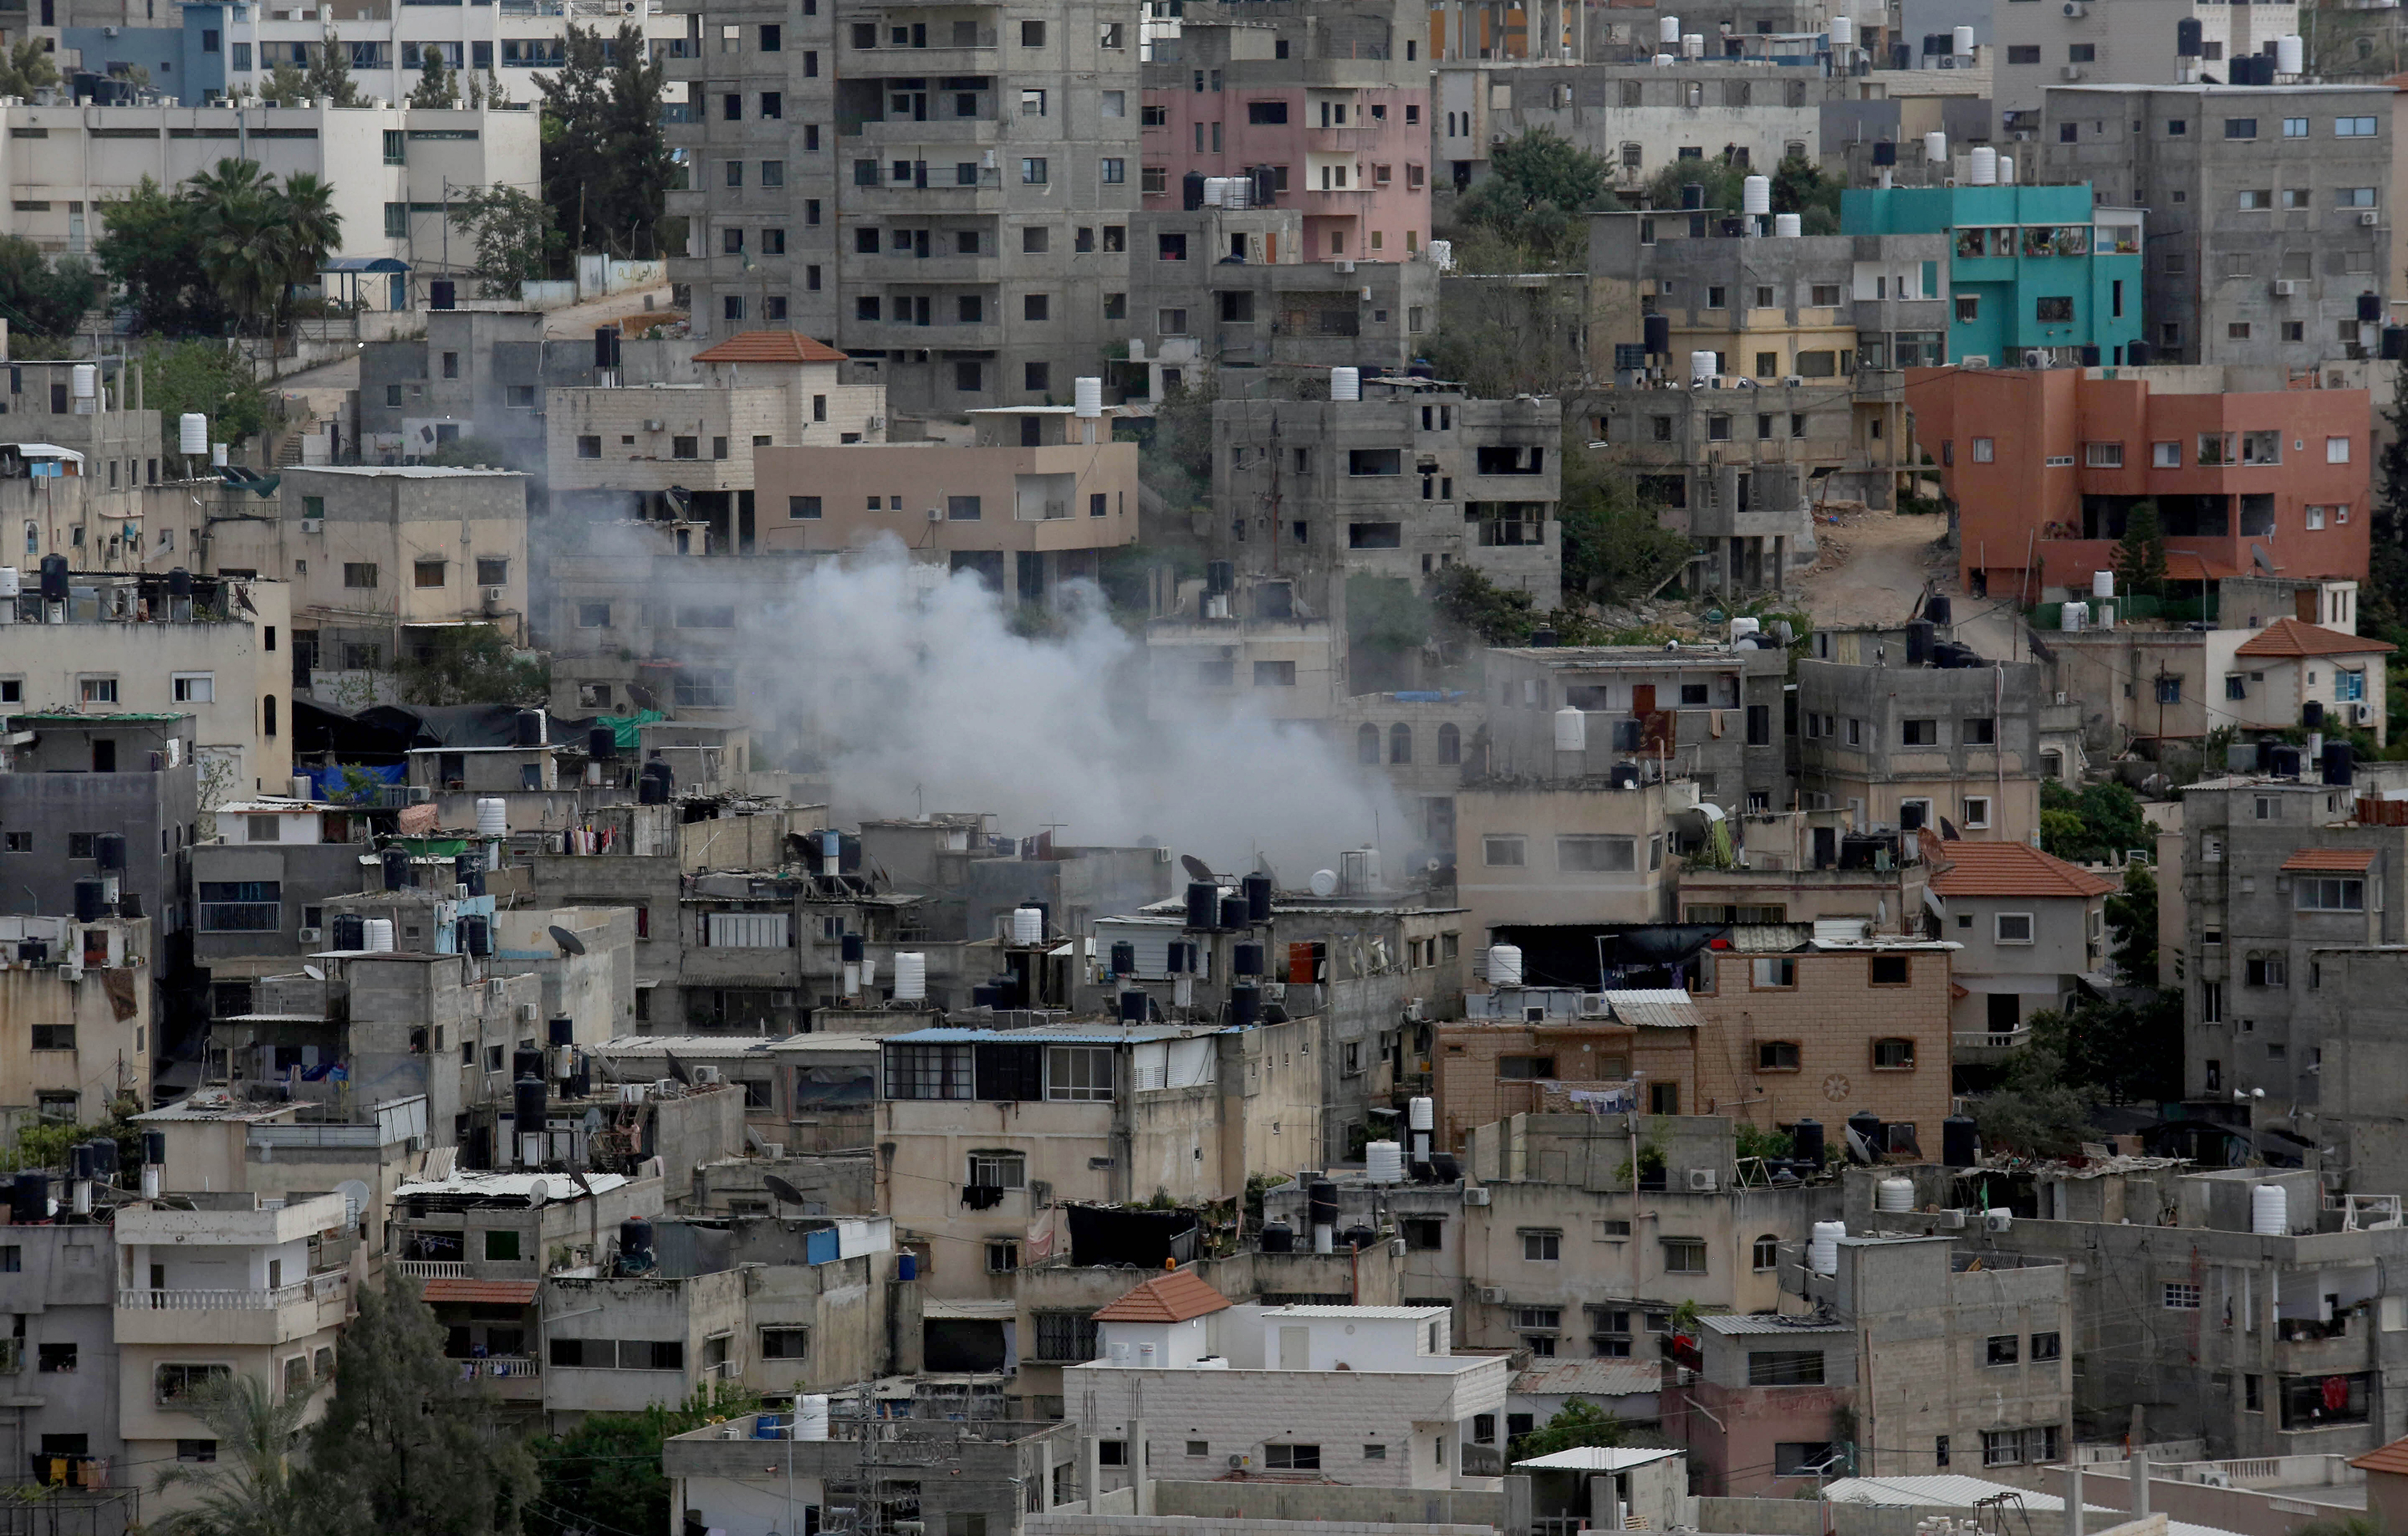 A view of buildings in Dulkarm, West Bank, April 19. (Credit: Nedal Eshtayah/Anadolu/Getty Images)